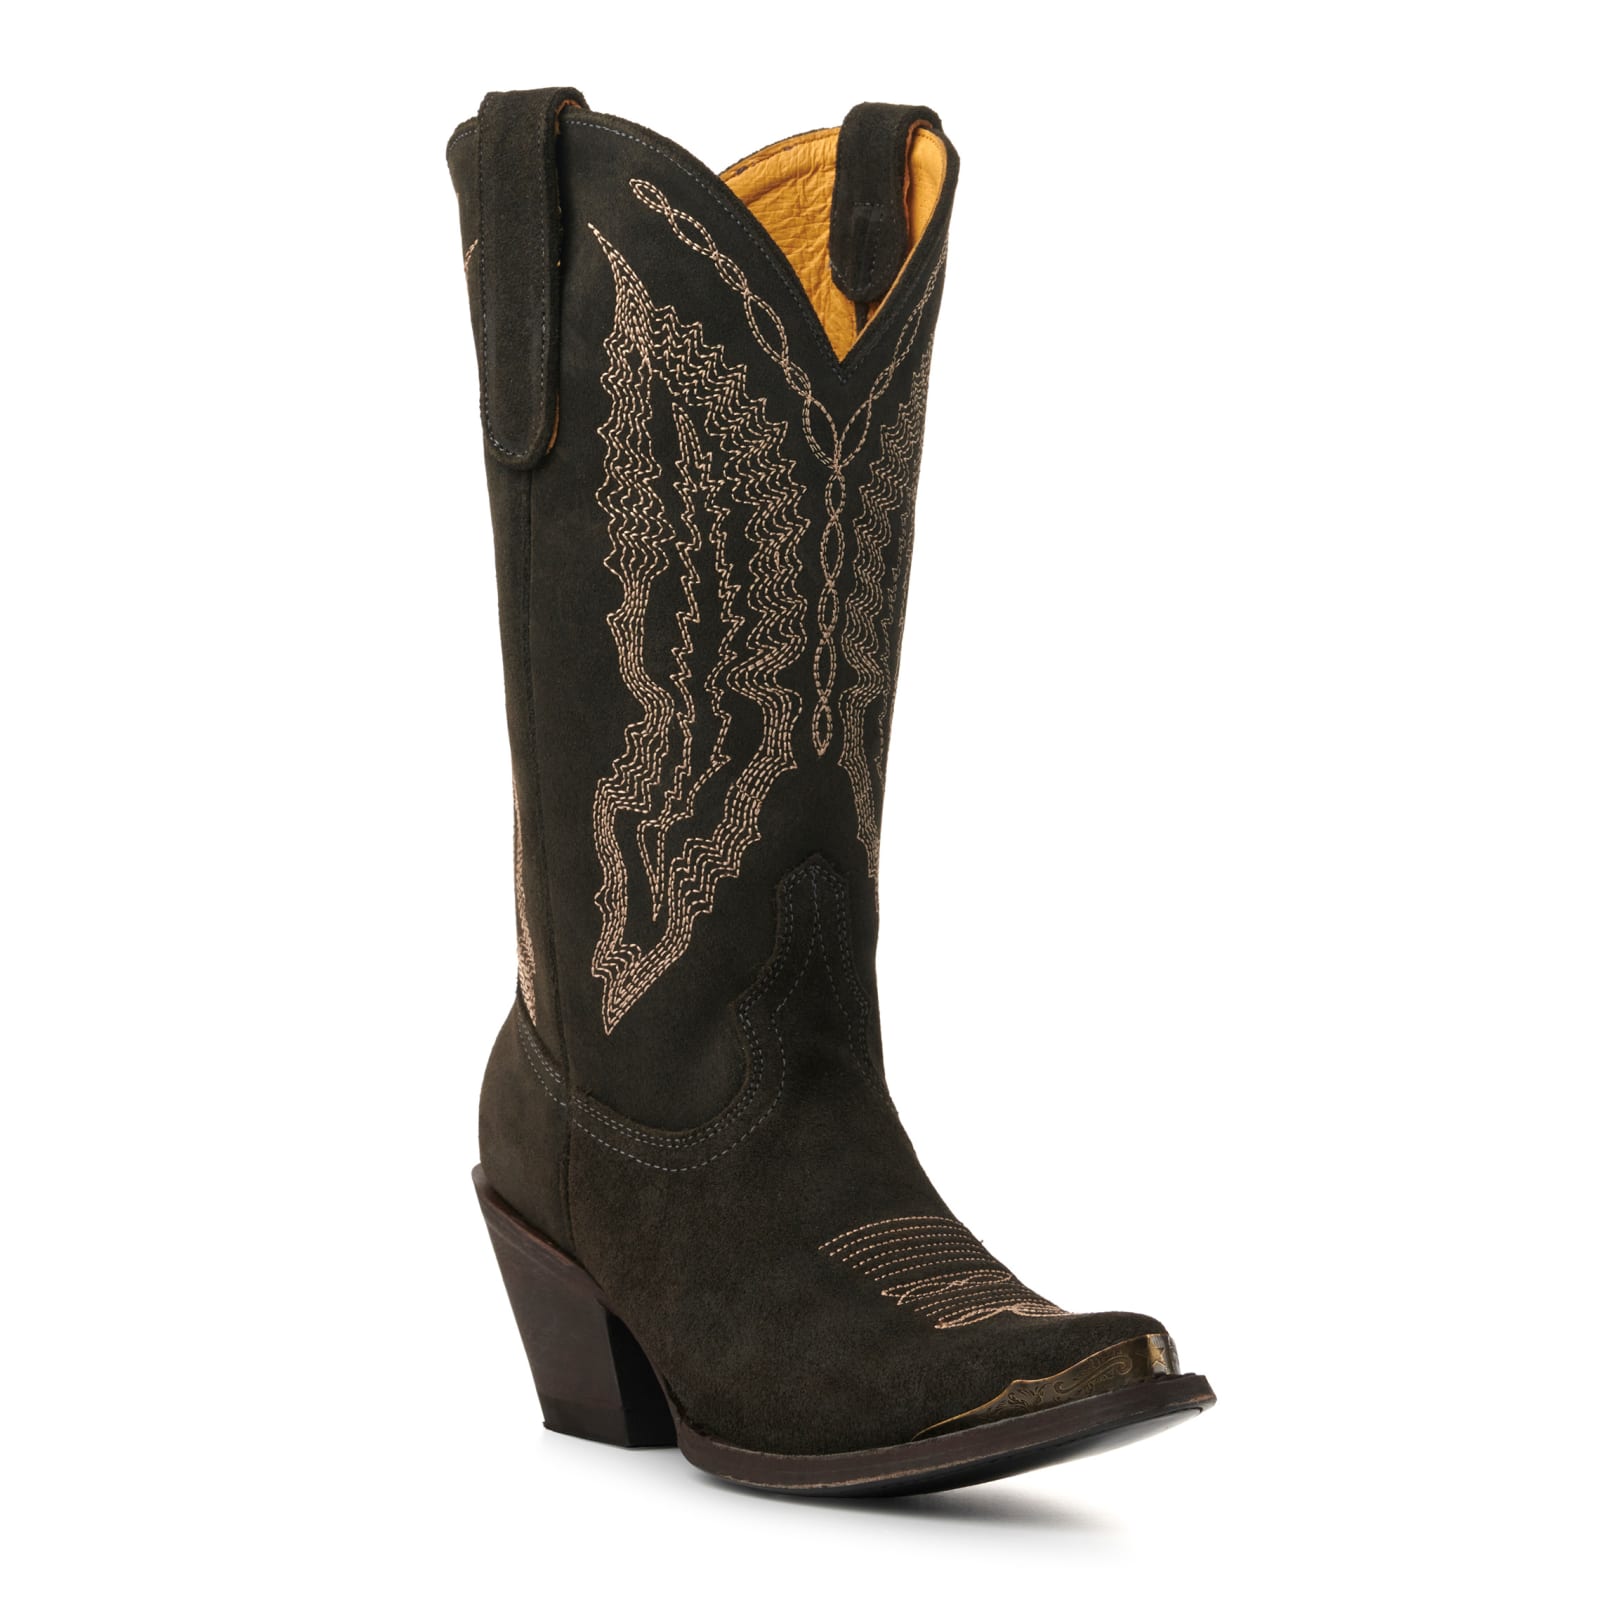 Cavender's Women's Black Suede with Brass Toe Tip J-Toe Cowboy Boots  available at Cavenders